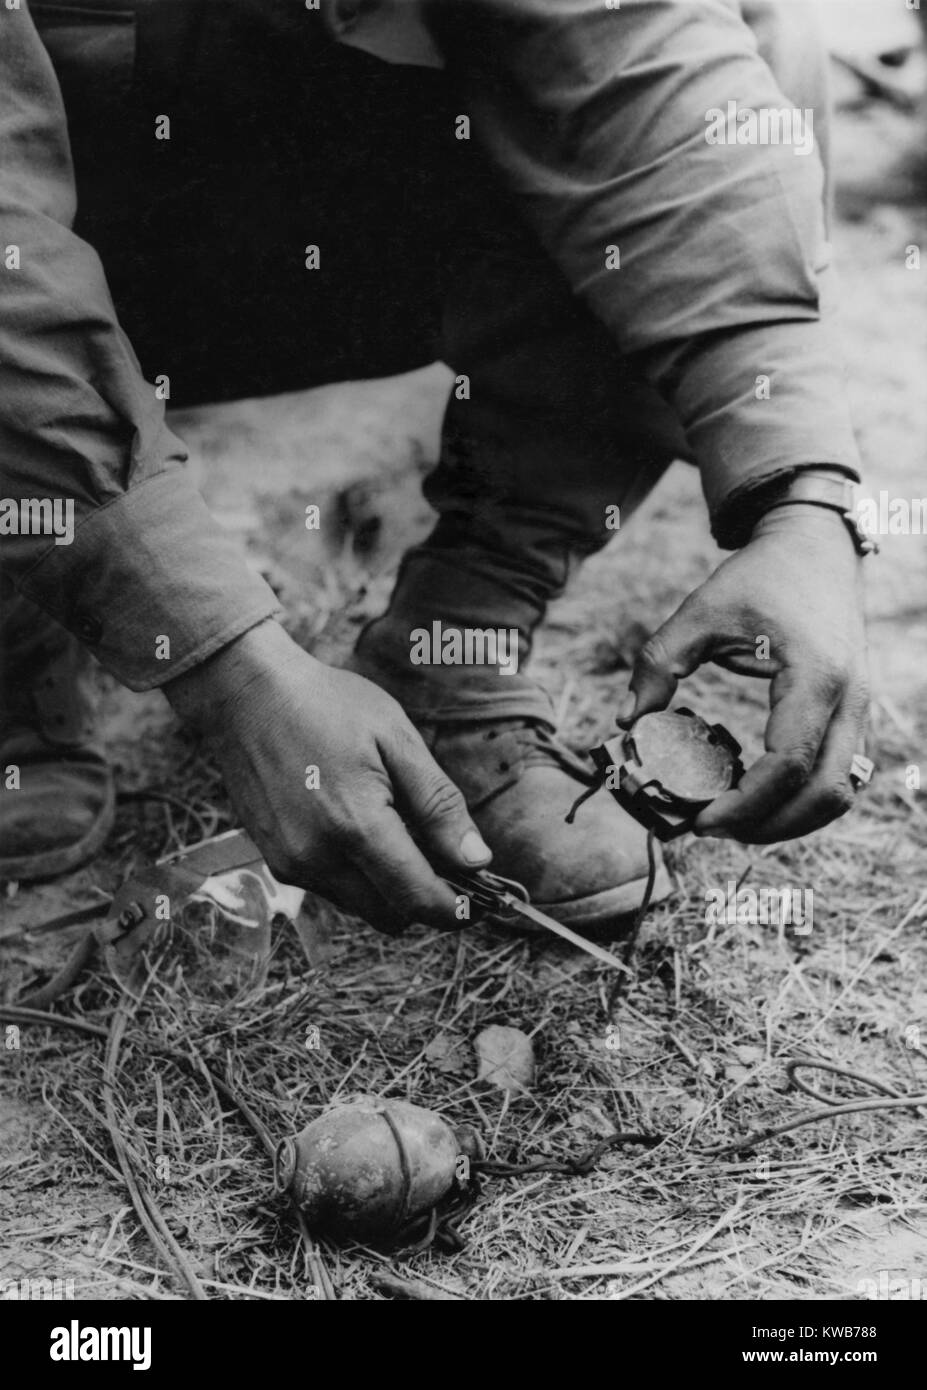 U.S. soldier dismantles a German booby trap planted on the road to St. Gilles. The device consisted of a tempting compass attached to a grenade with a shoestring. Picking up the compass would have pulled a pin, setting off the grenade. 1944. World War 2. (BSLOC 2014 10 159) Stock Photo